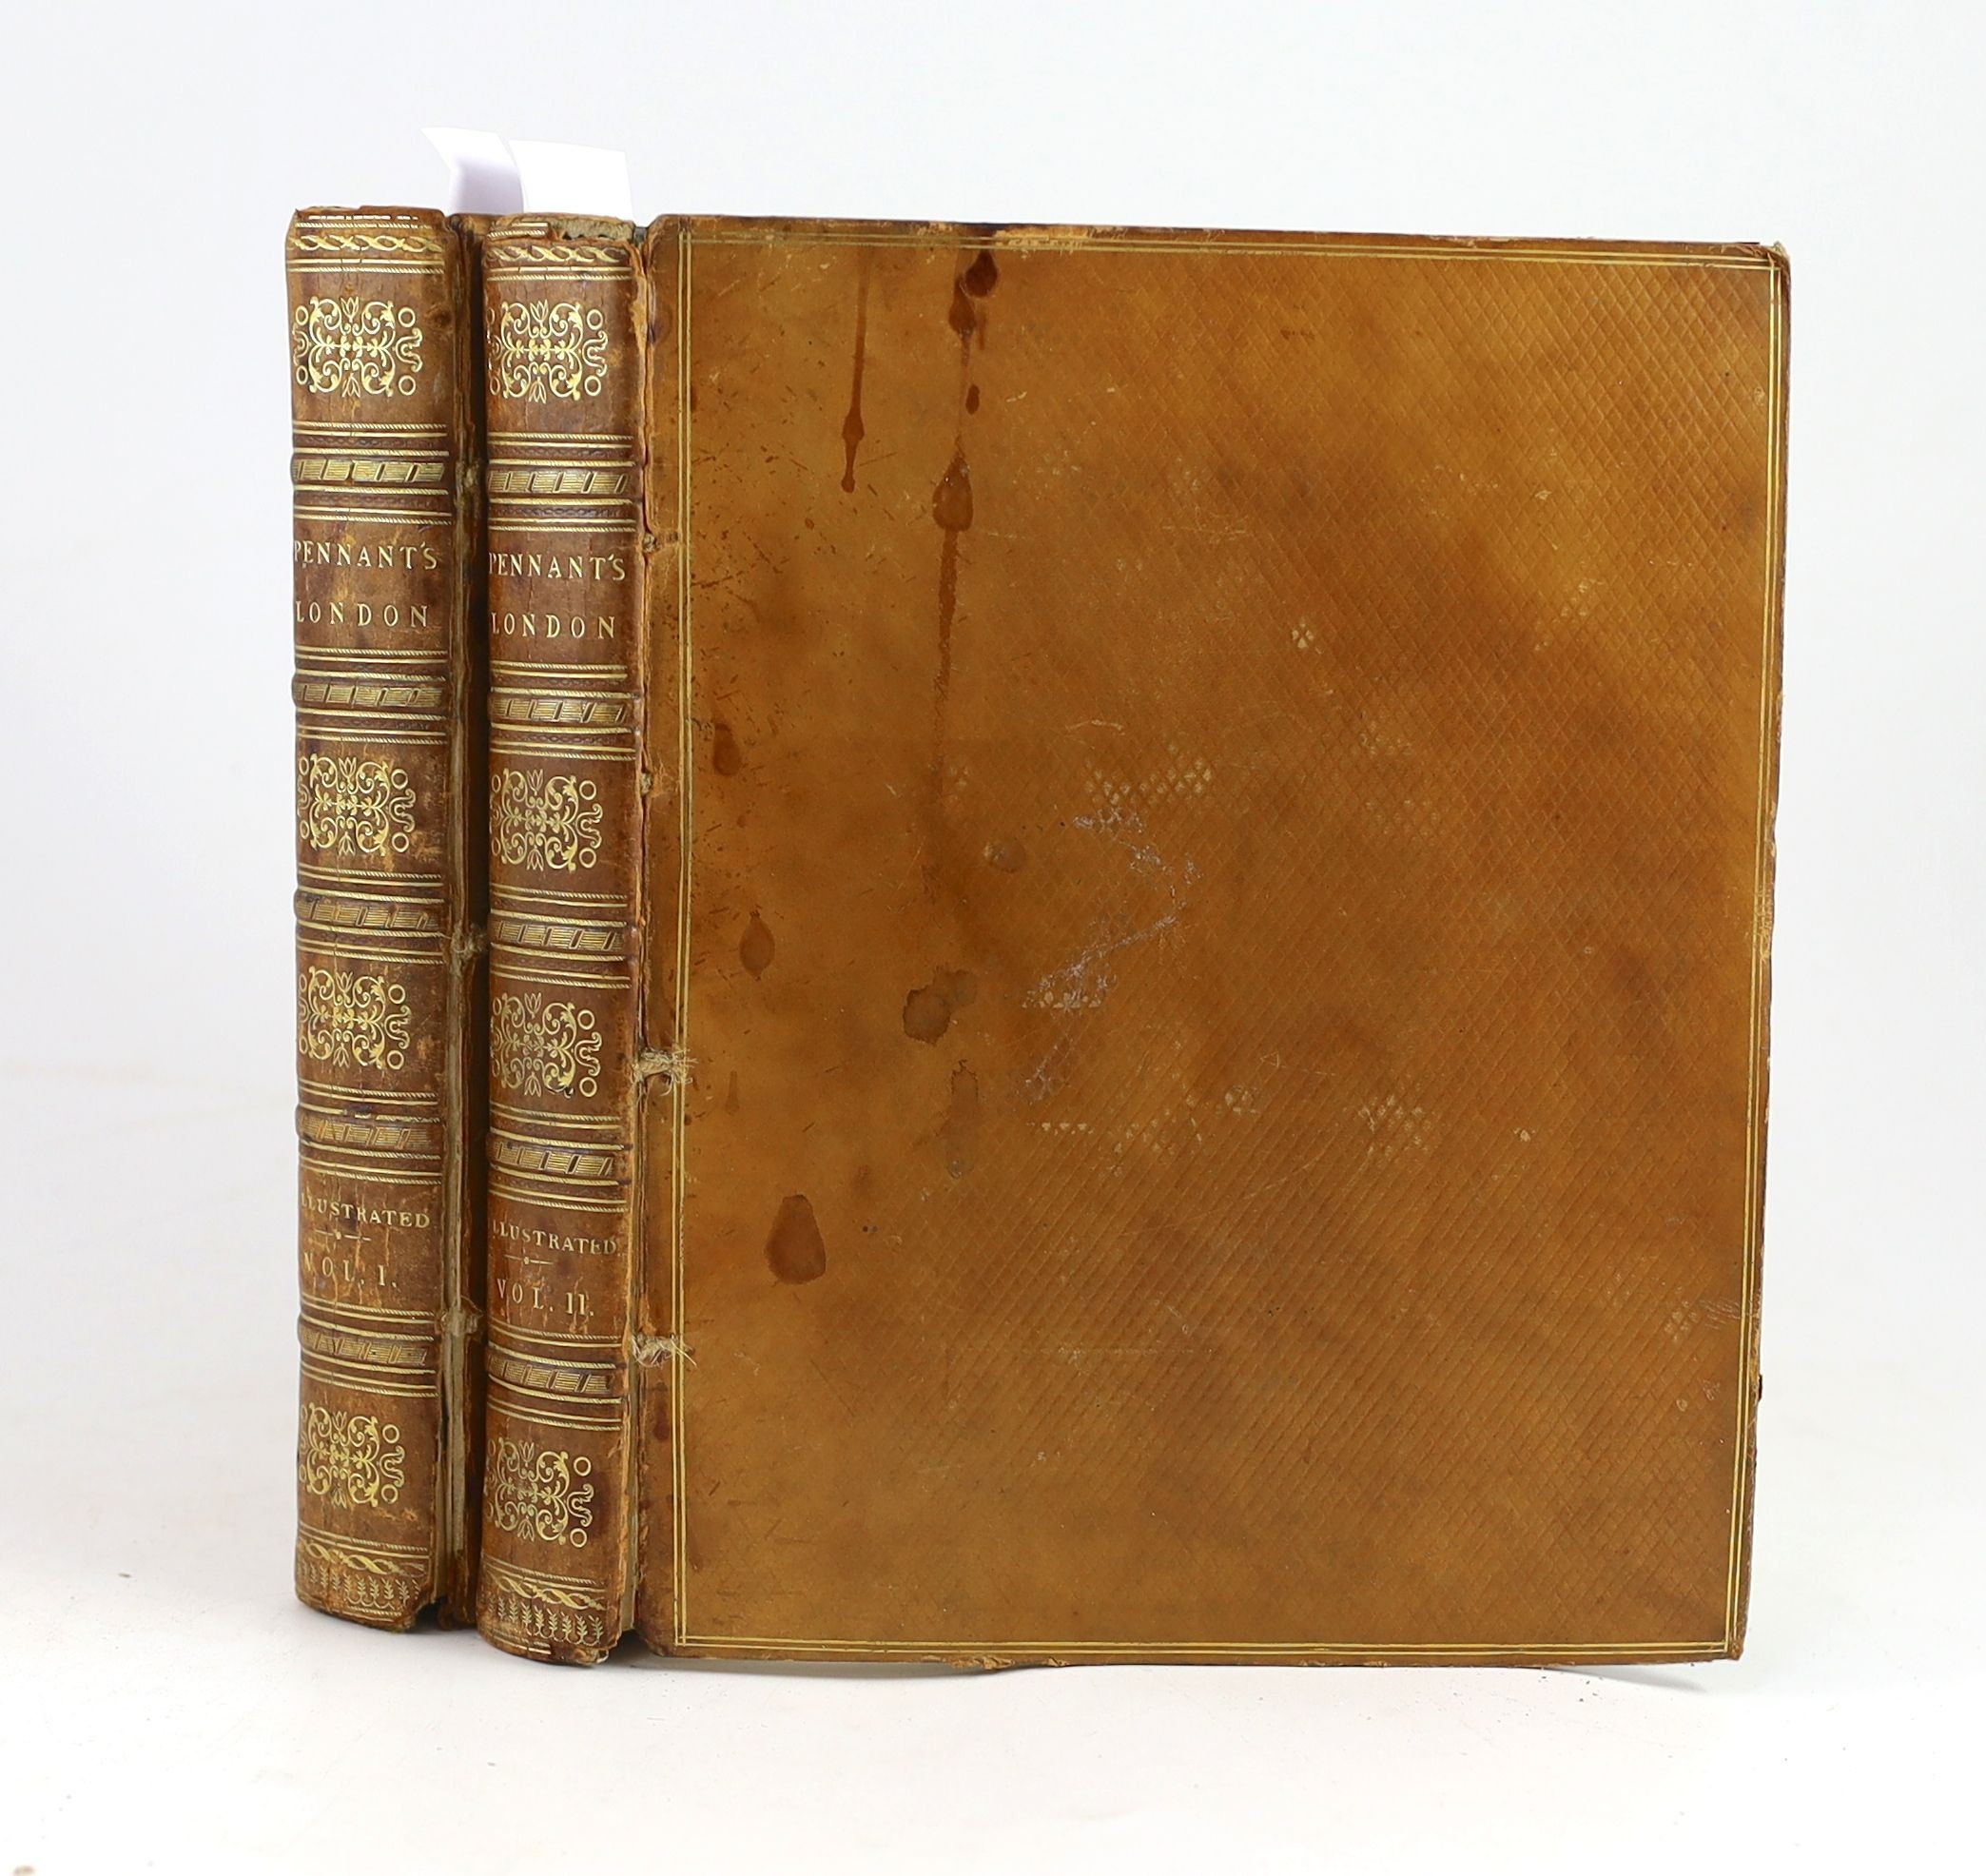 Pennant, Thomas - Of London, 1 vol in 2, with portrait frontispiece, engraved title, extra illustrated with plates, many folding, 2nd vol bound with ‘’Additions and Corrections to the First edition, 1791, 4to, diced calf